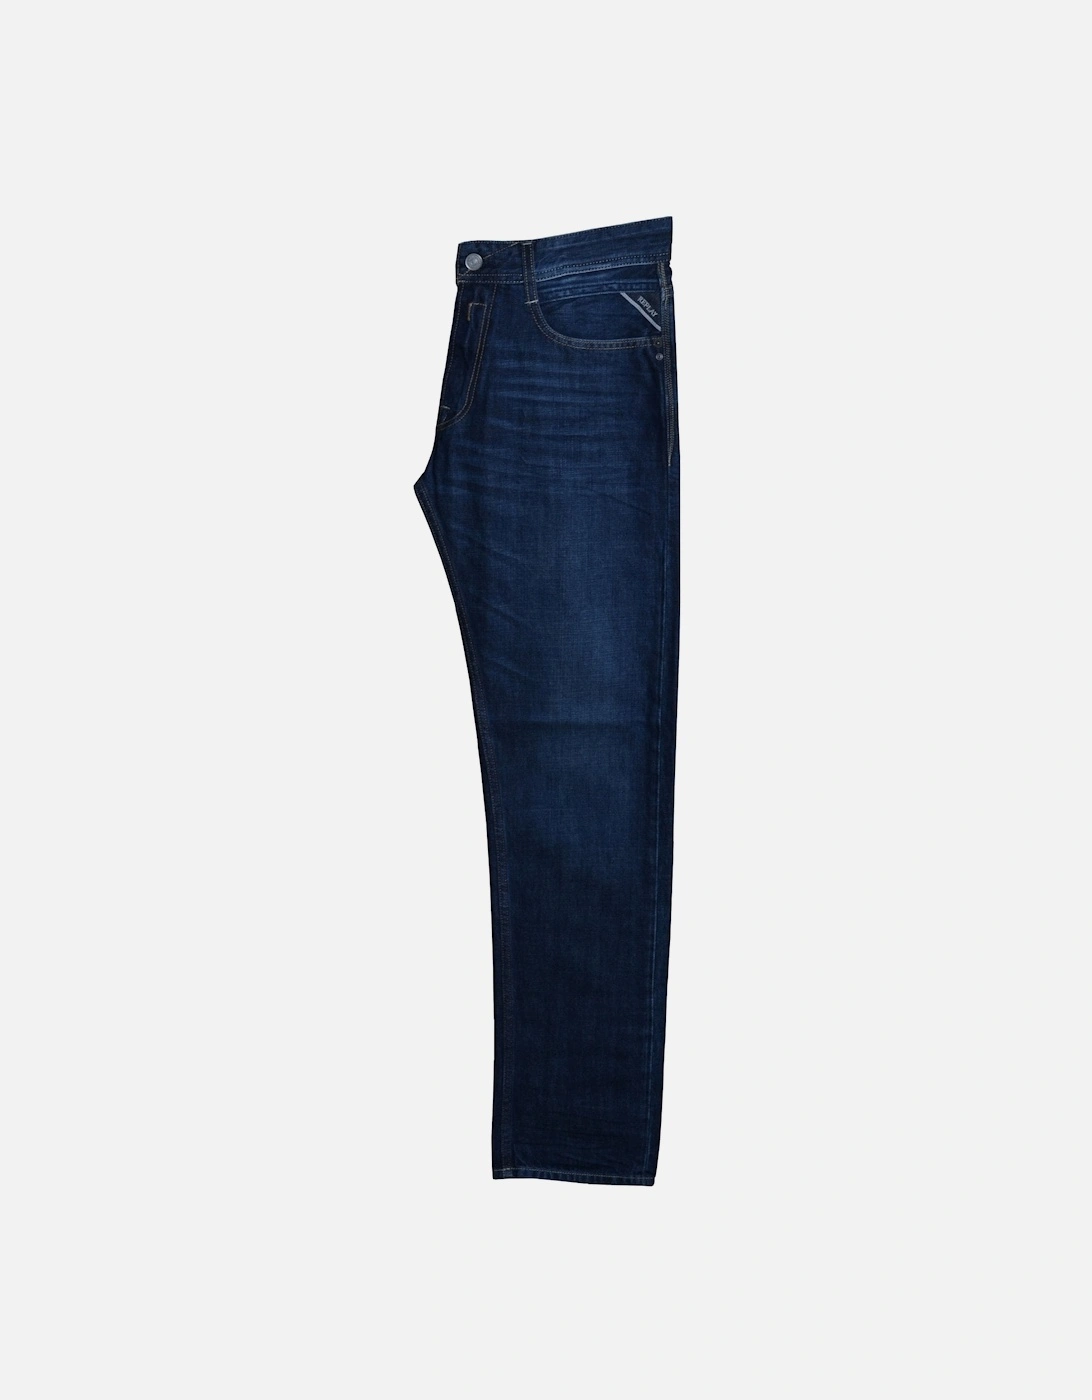 Men's Rob Authentic Blue Straight Tapered Denim Jeans